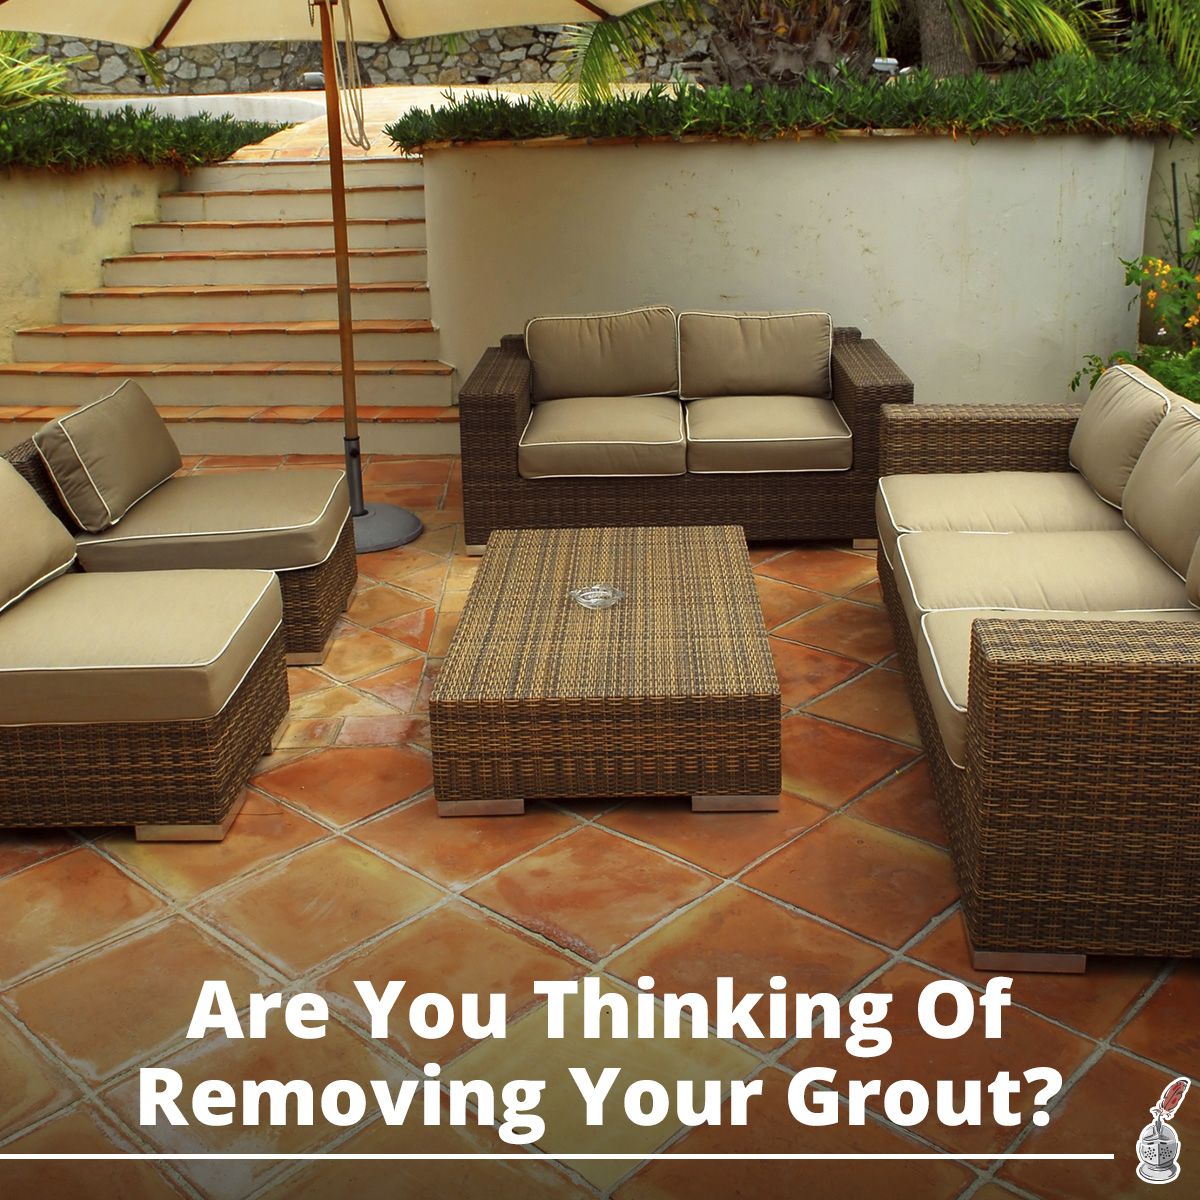 Are You Thinking Of Removing Your Grout?